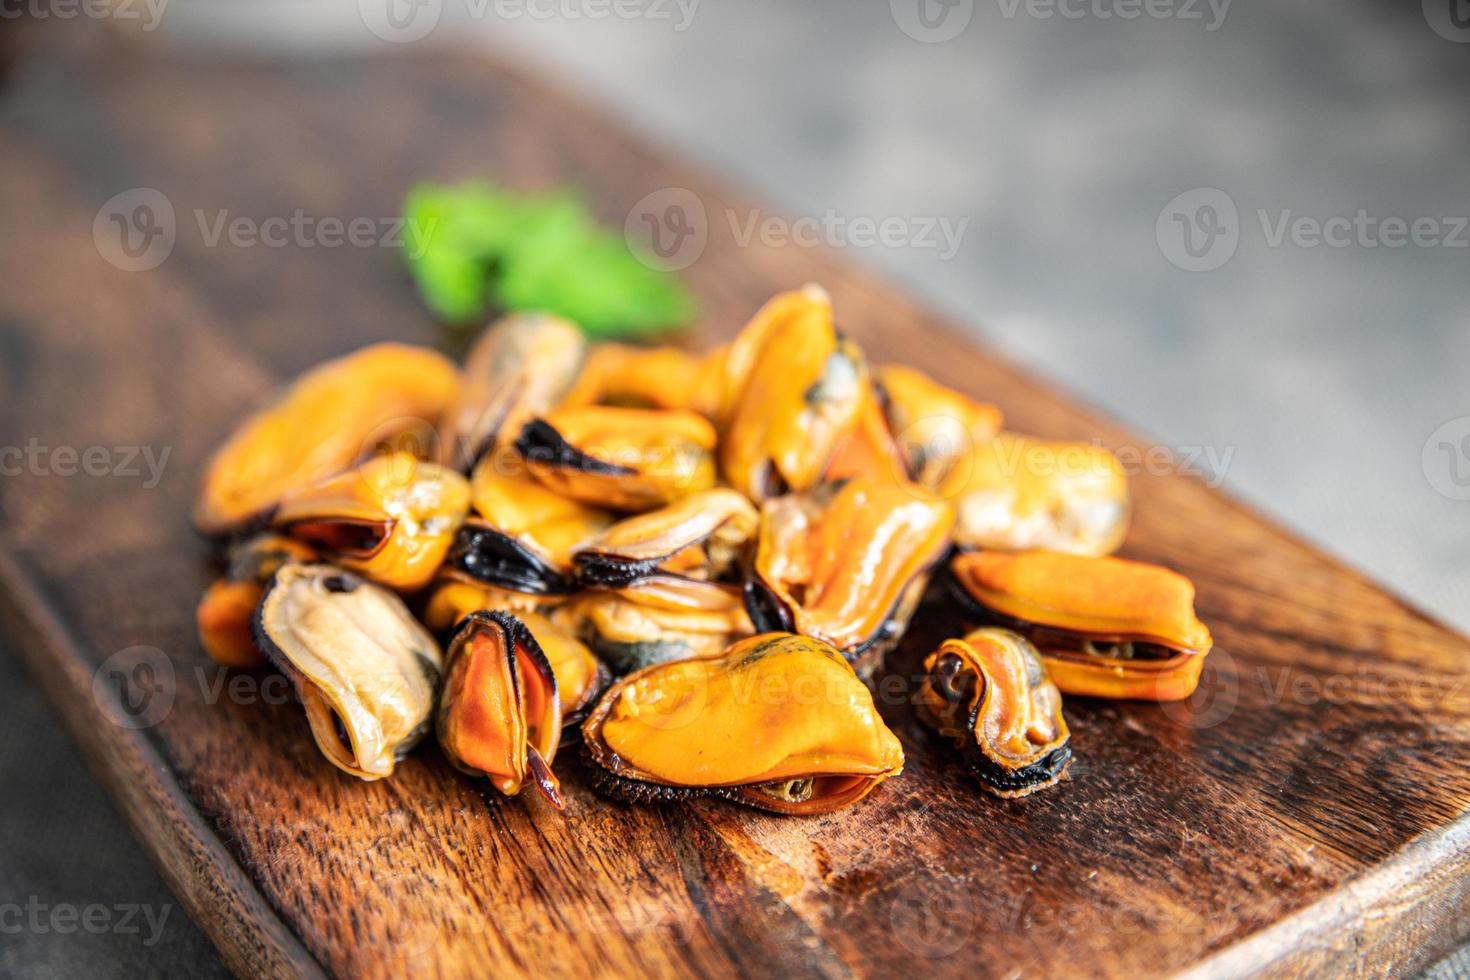 mussels ready to eat seafood fresh healthy meal food snack diet on the table copy space food background photo